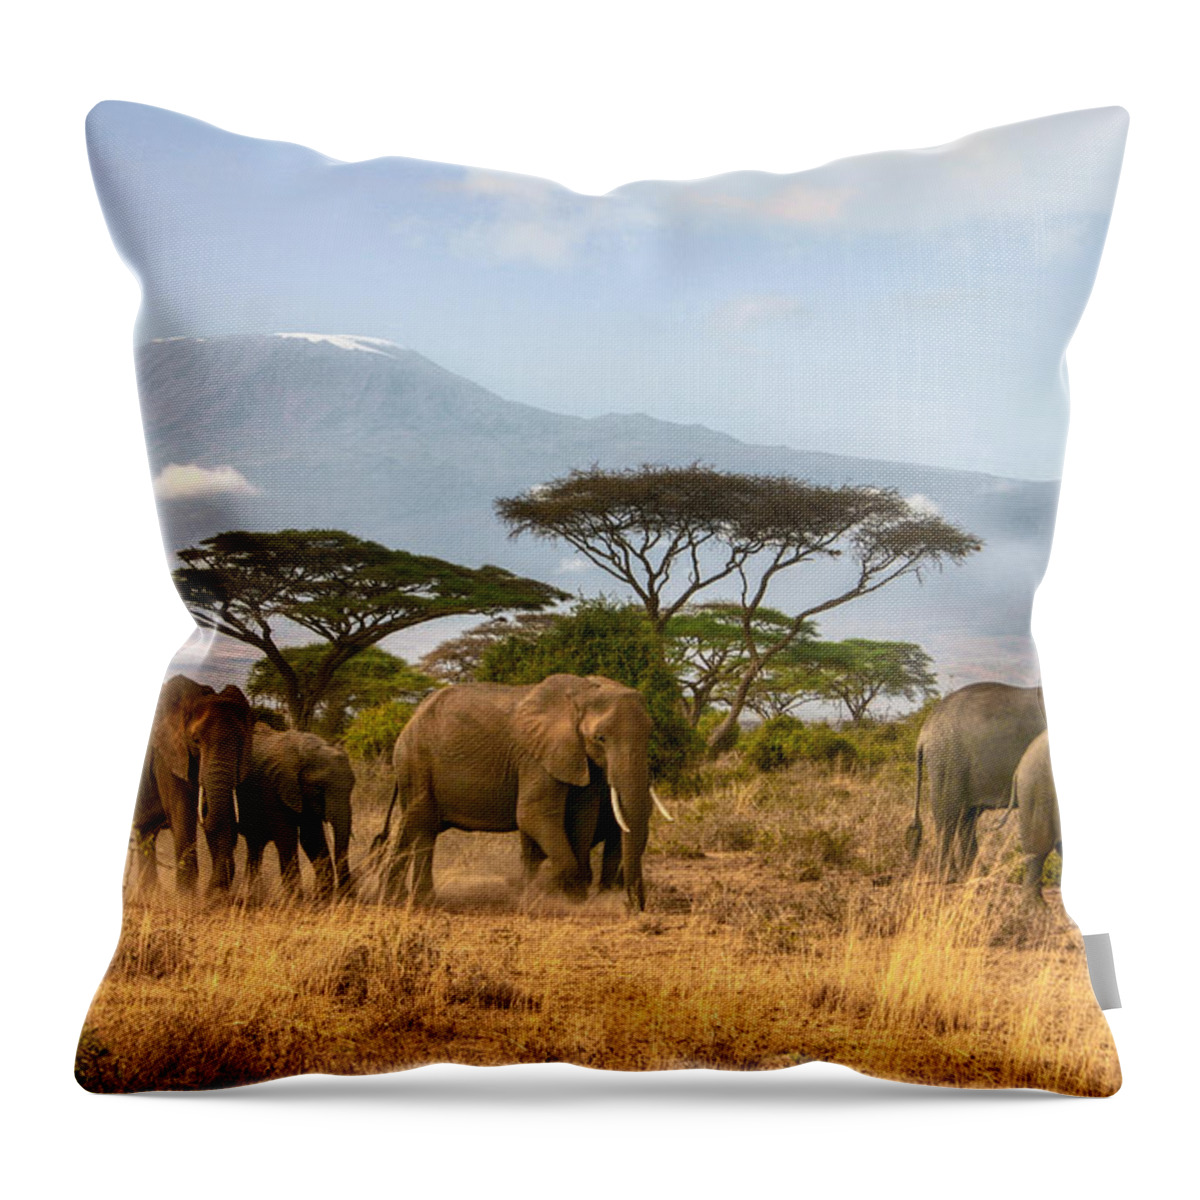 Elephant Throw Pillow featuring the photograph Kilimanjaro Elephants by Gene Taylor